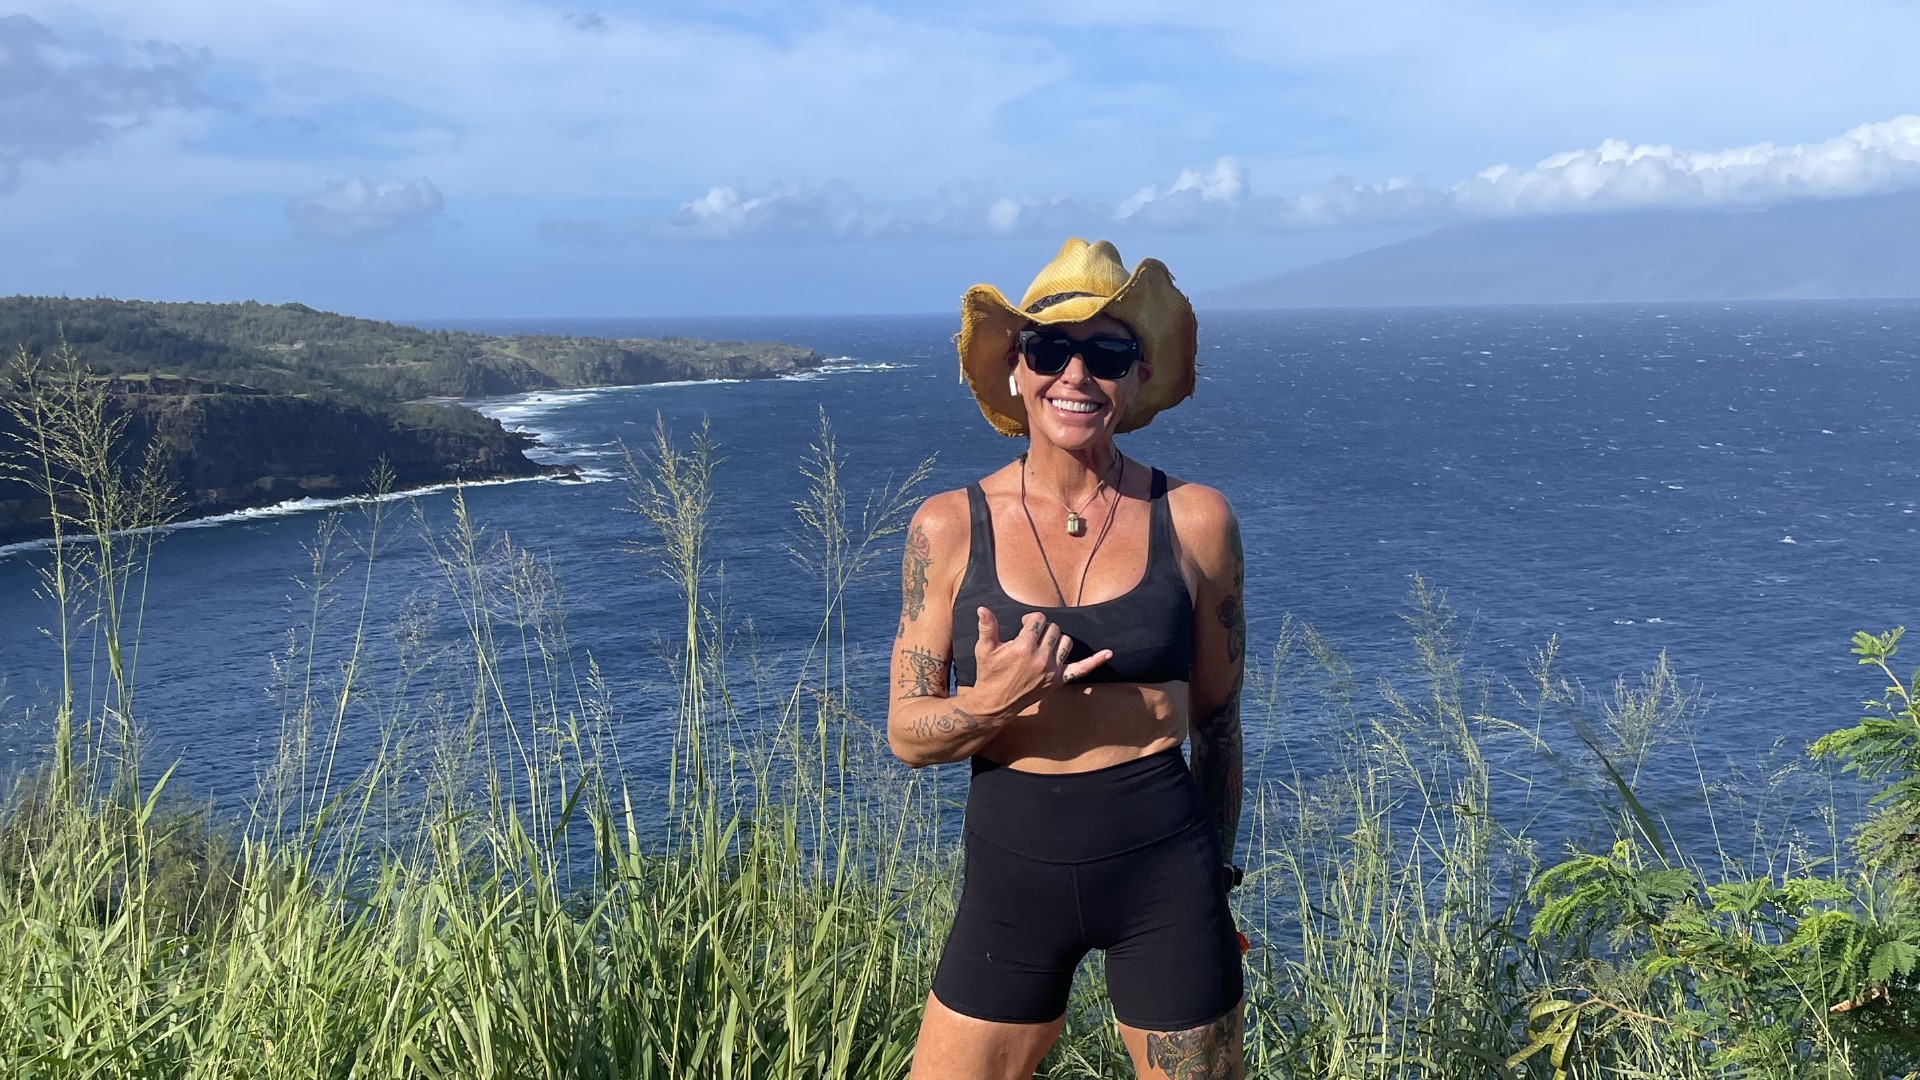 Bridget Brinkman spent the last week walking the perimeter of the island of Maui— 164 miles plus some. Brinkman lost her son Crey to suicide a few years ago.